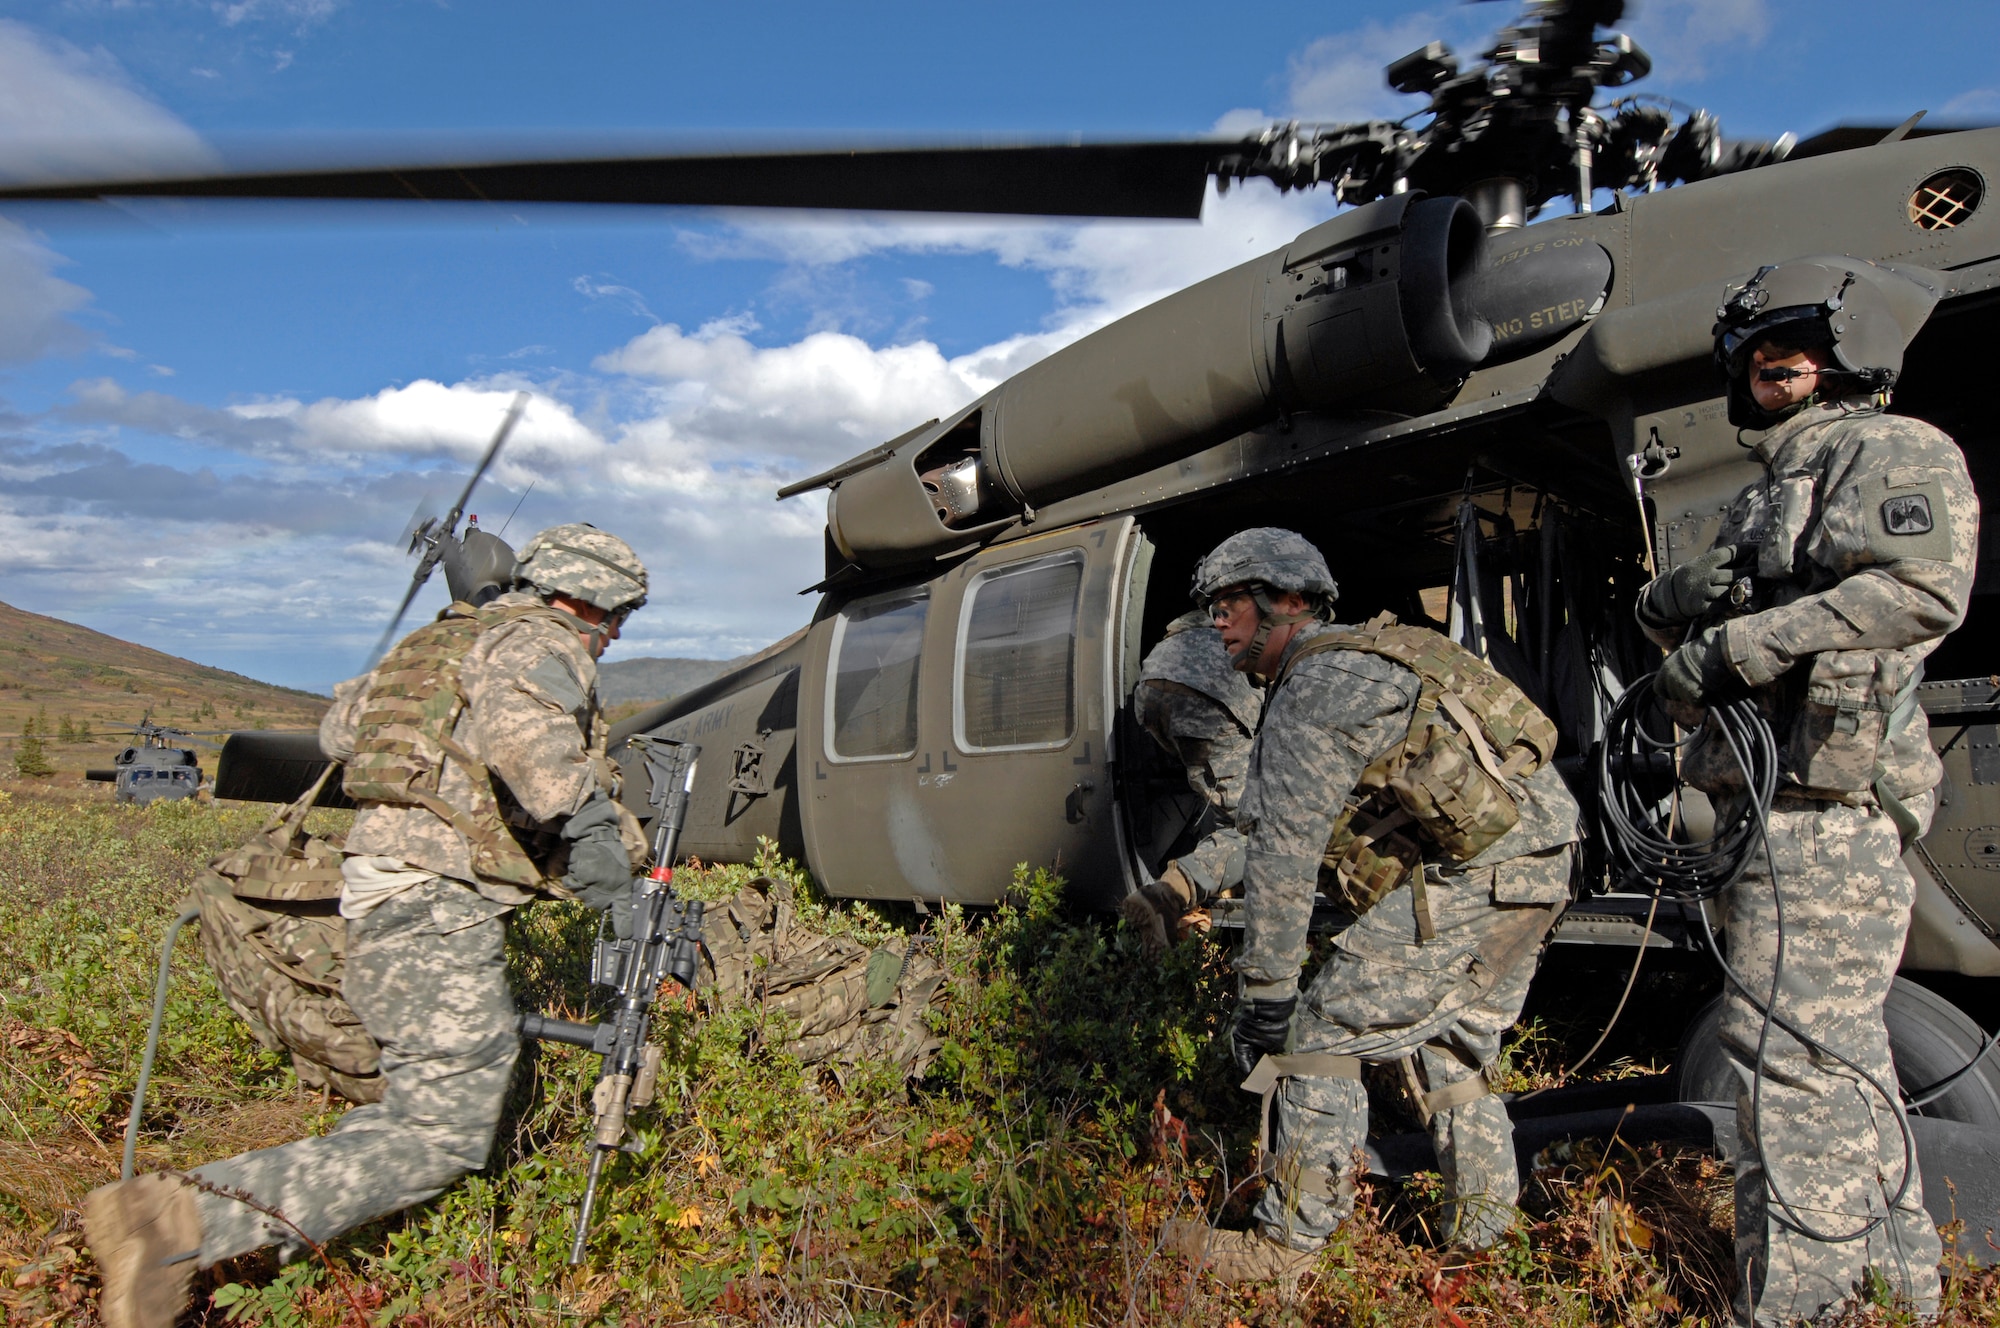 Soldiers from 1st Squadron (Airborne), 40th Cavalry Regiment load a UH-60 Blackhawk helicopter during a training mission near Joint Base Elmendorf-Richardson, Sept. 13. The mission consisted of an air assault, security operations and setting up observation posts. The Soldiers are training in preparation for a deployment to Afghanistan later this year. (U.S. Air Force photo/Staff Sgt. Brian Ferguson)(Released) 